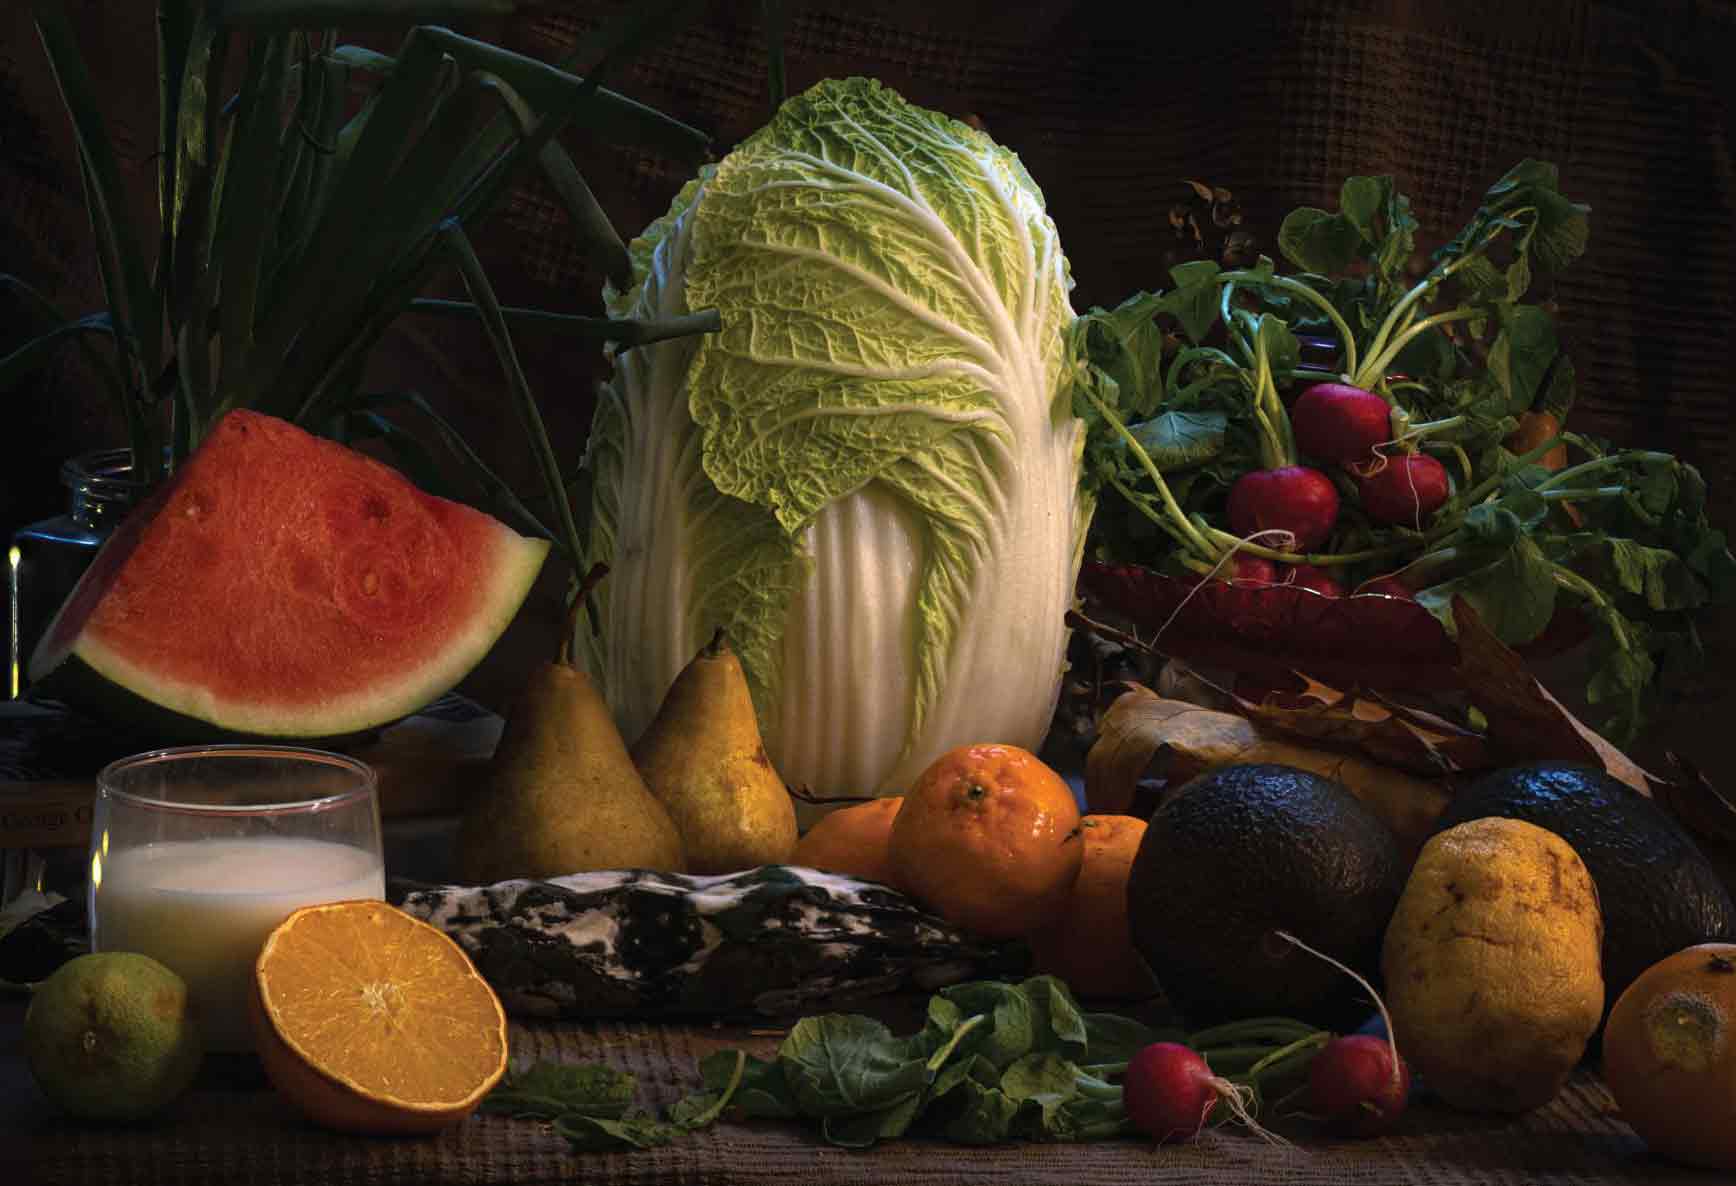 a still life photograph with soft dramatic lighting depicting vegetables, fruit, and a glass of milk arranged on a table.